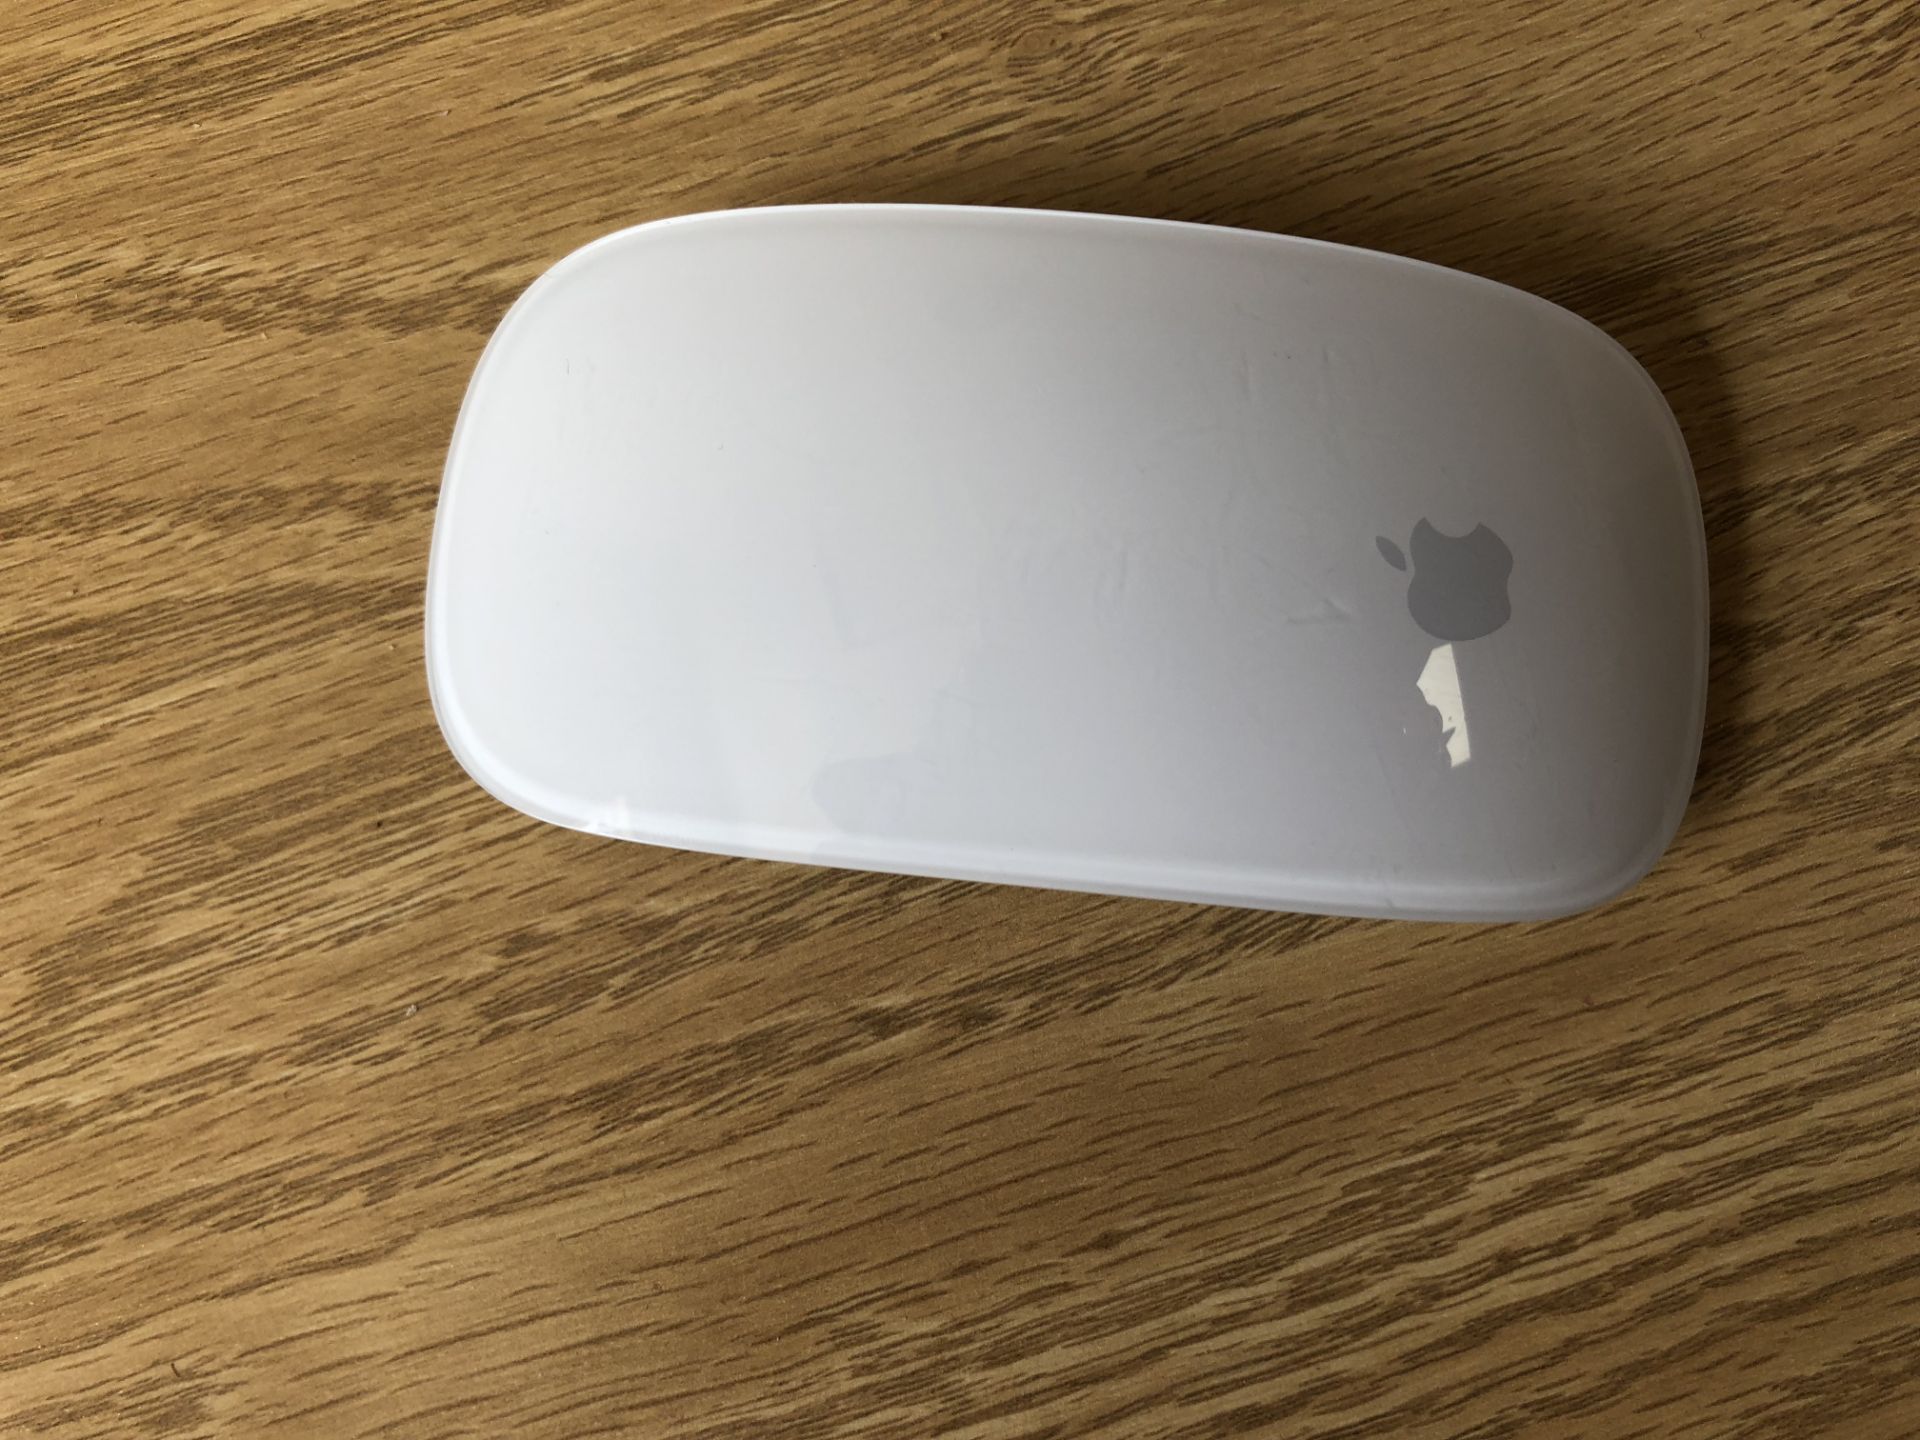 Apple Wireless Mouse, Model No. A1657